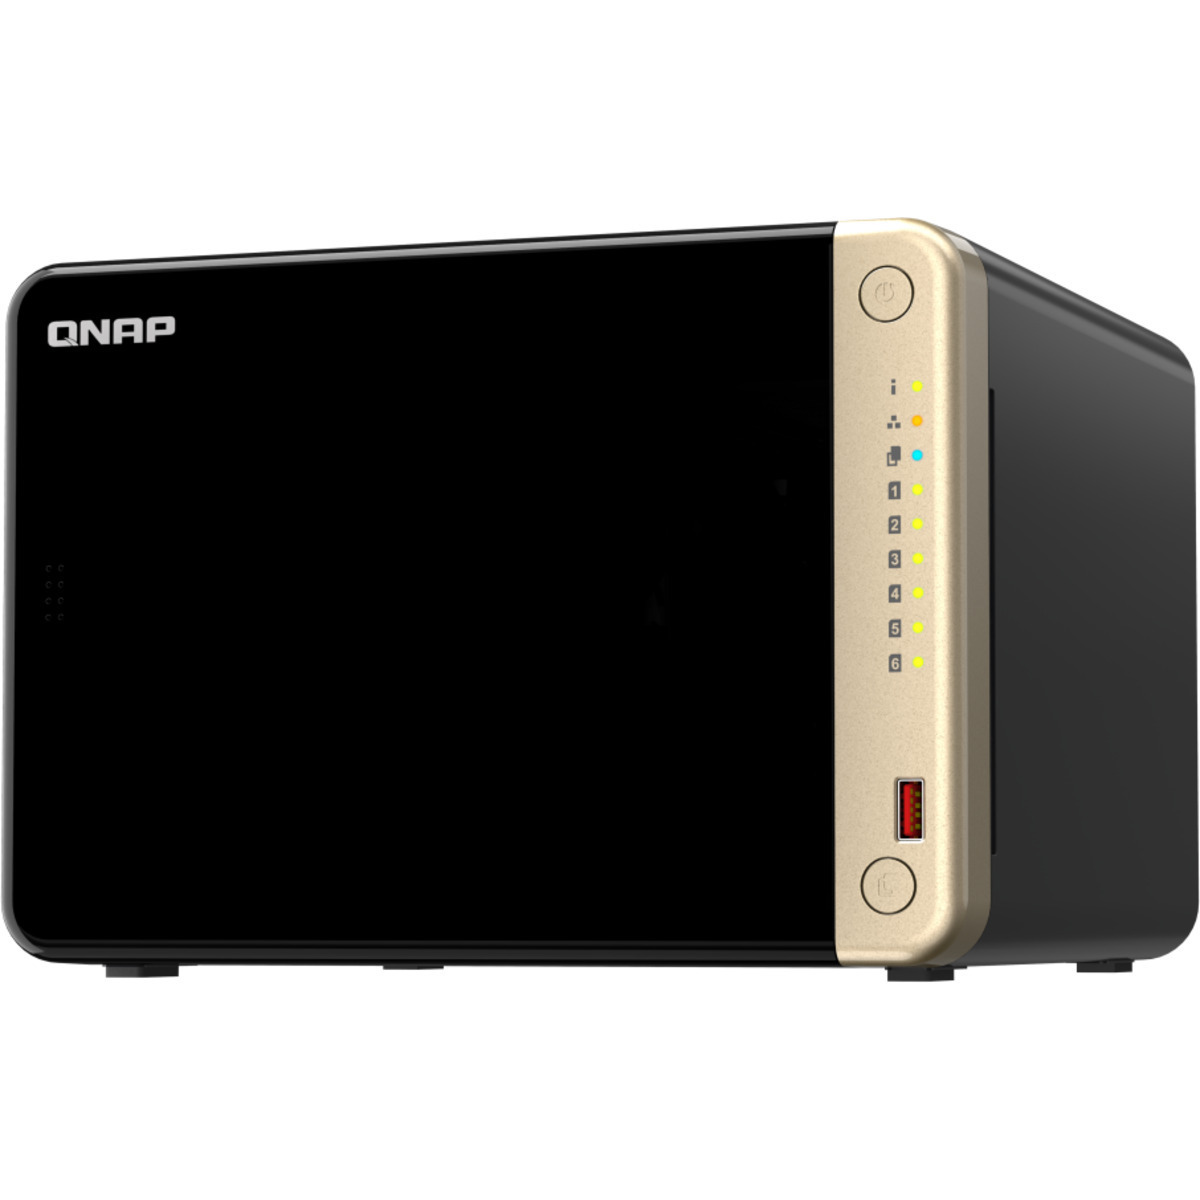 QNAP TS-664 20tb 6-Bay Desktop Multimedia / Power User / Business NAS - Network Attached Storage Device 5x4tb Crucial MX500 CT4000MX500SSD1 2.5 560/510MB/s SATA 6Gb/s SSD CONSUMER Class Drives Installed - Burn-In Tested TS-664